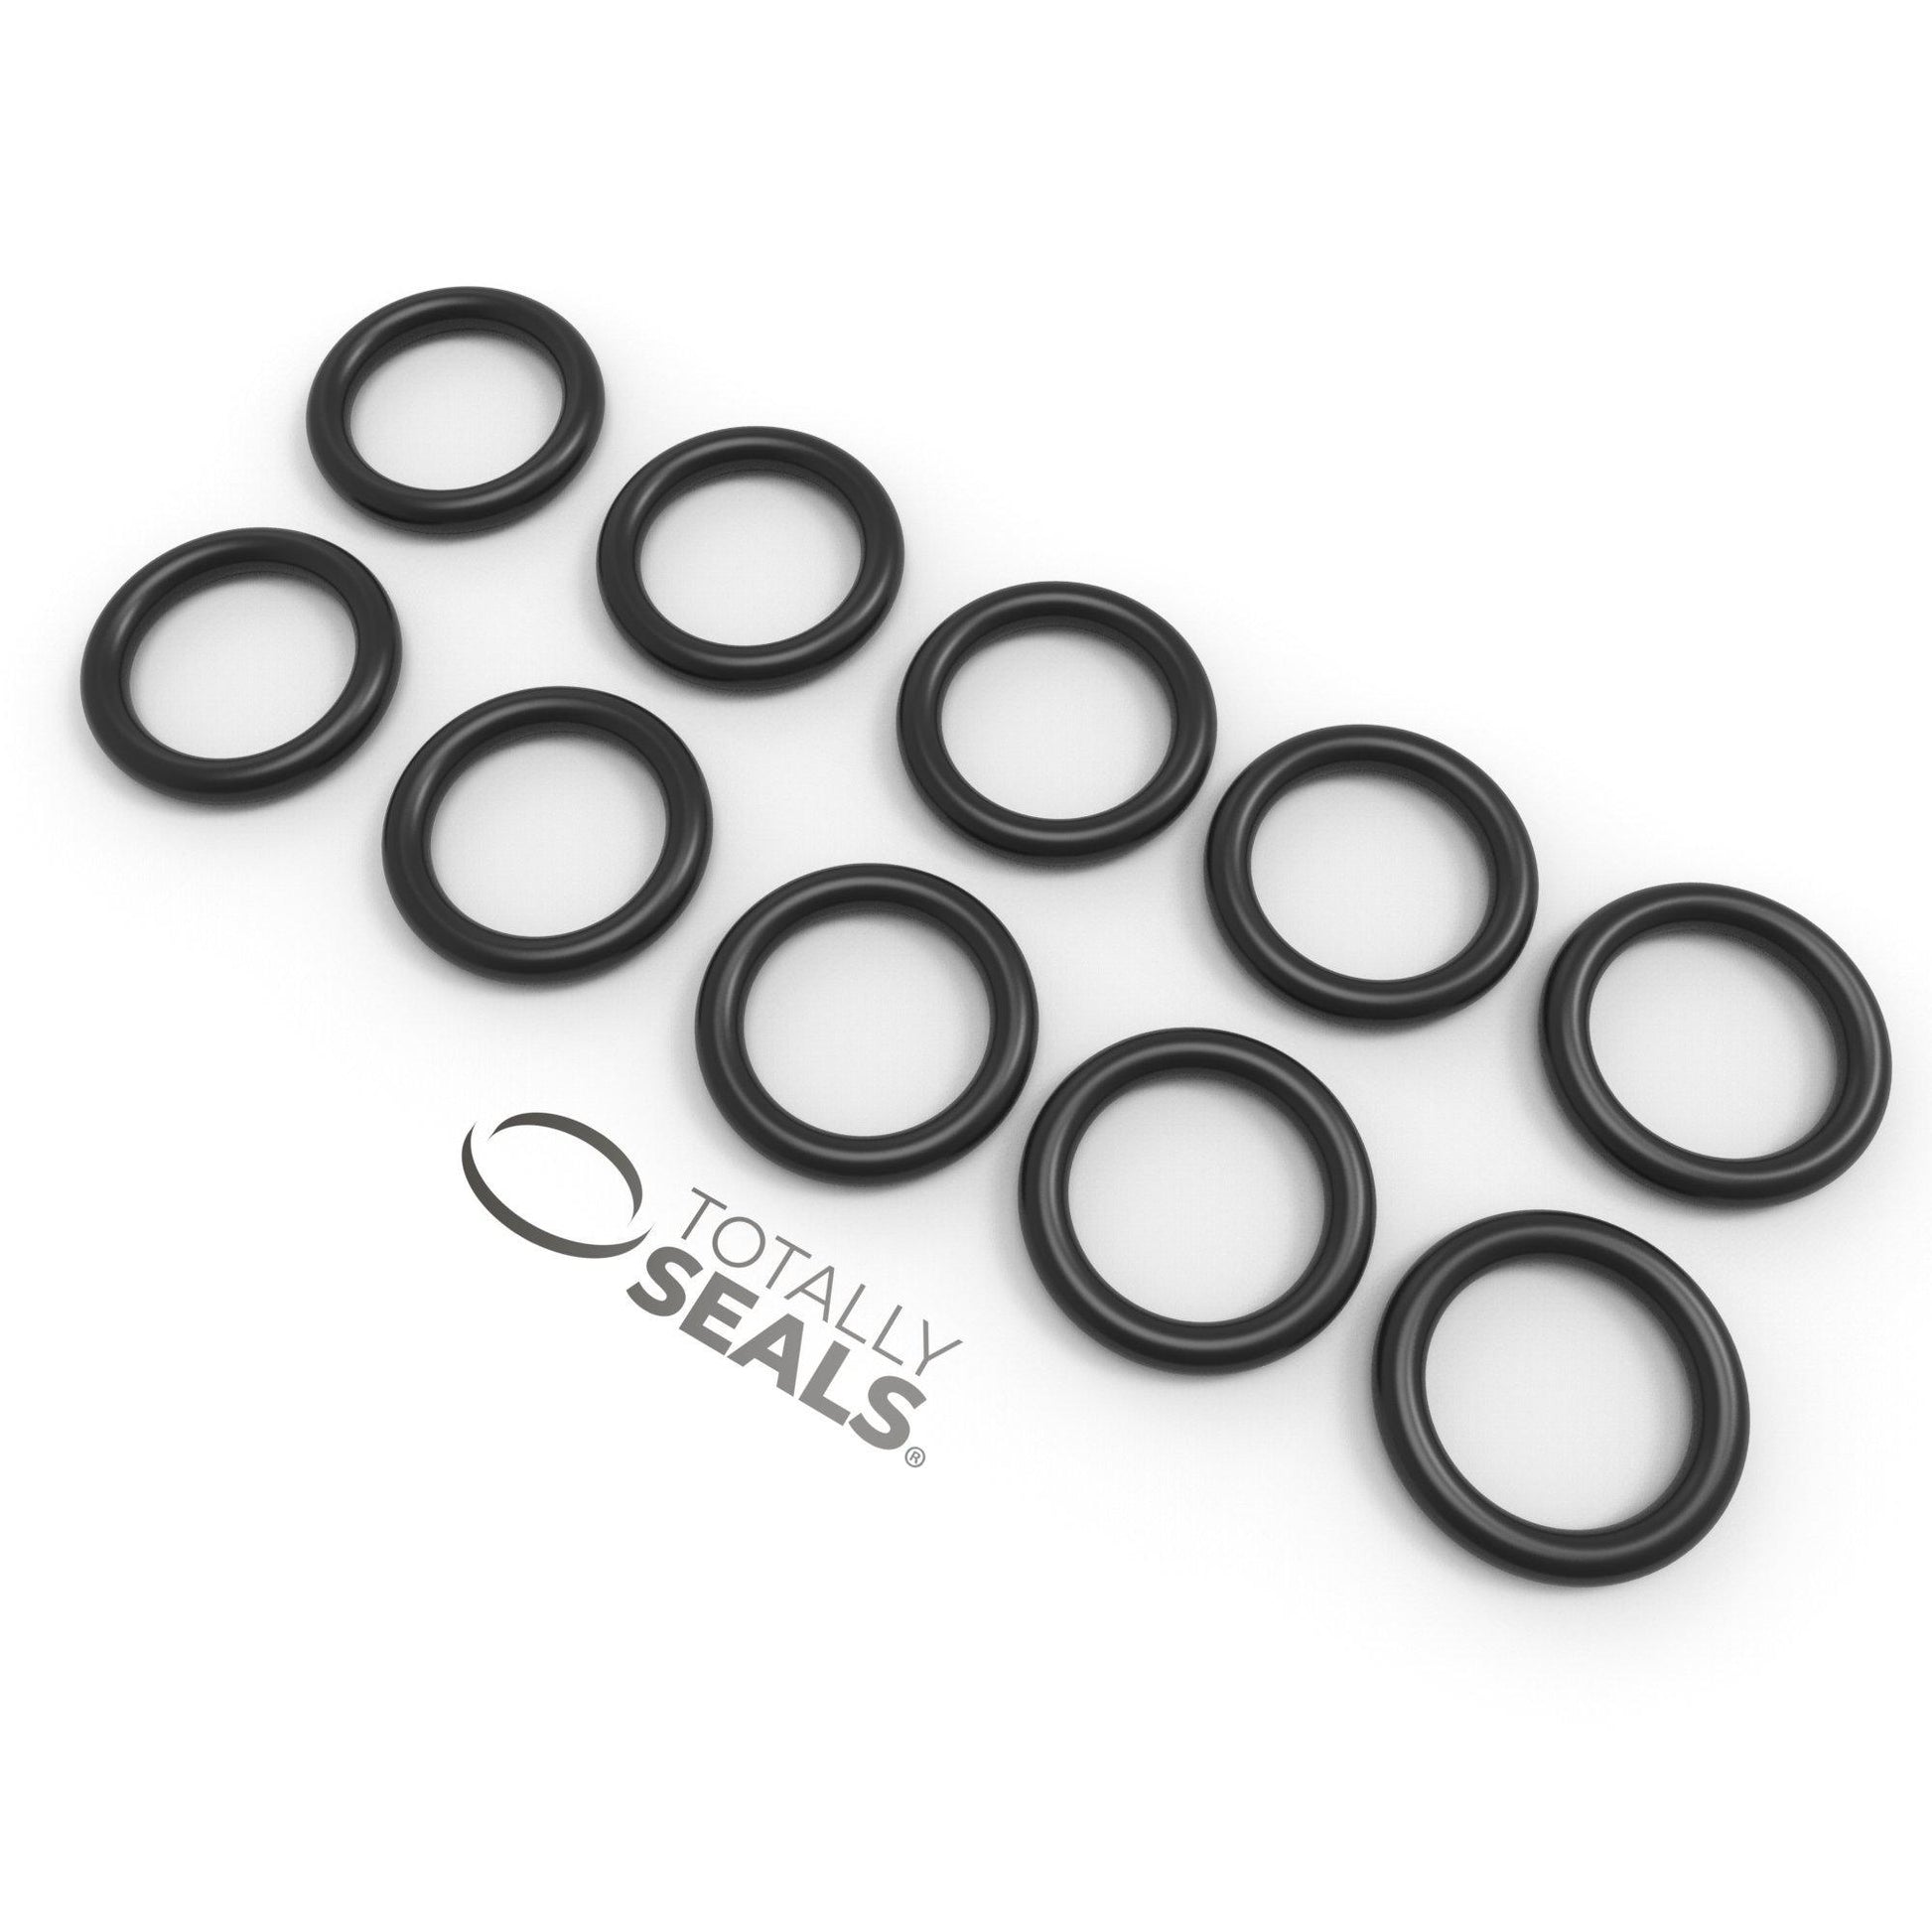 26mm x 1mm (28mm OD) Nitrile O-Rings - Totally Seals®